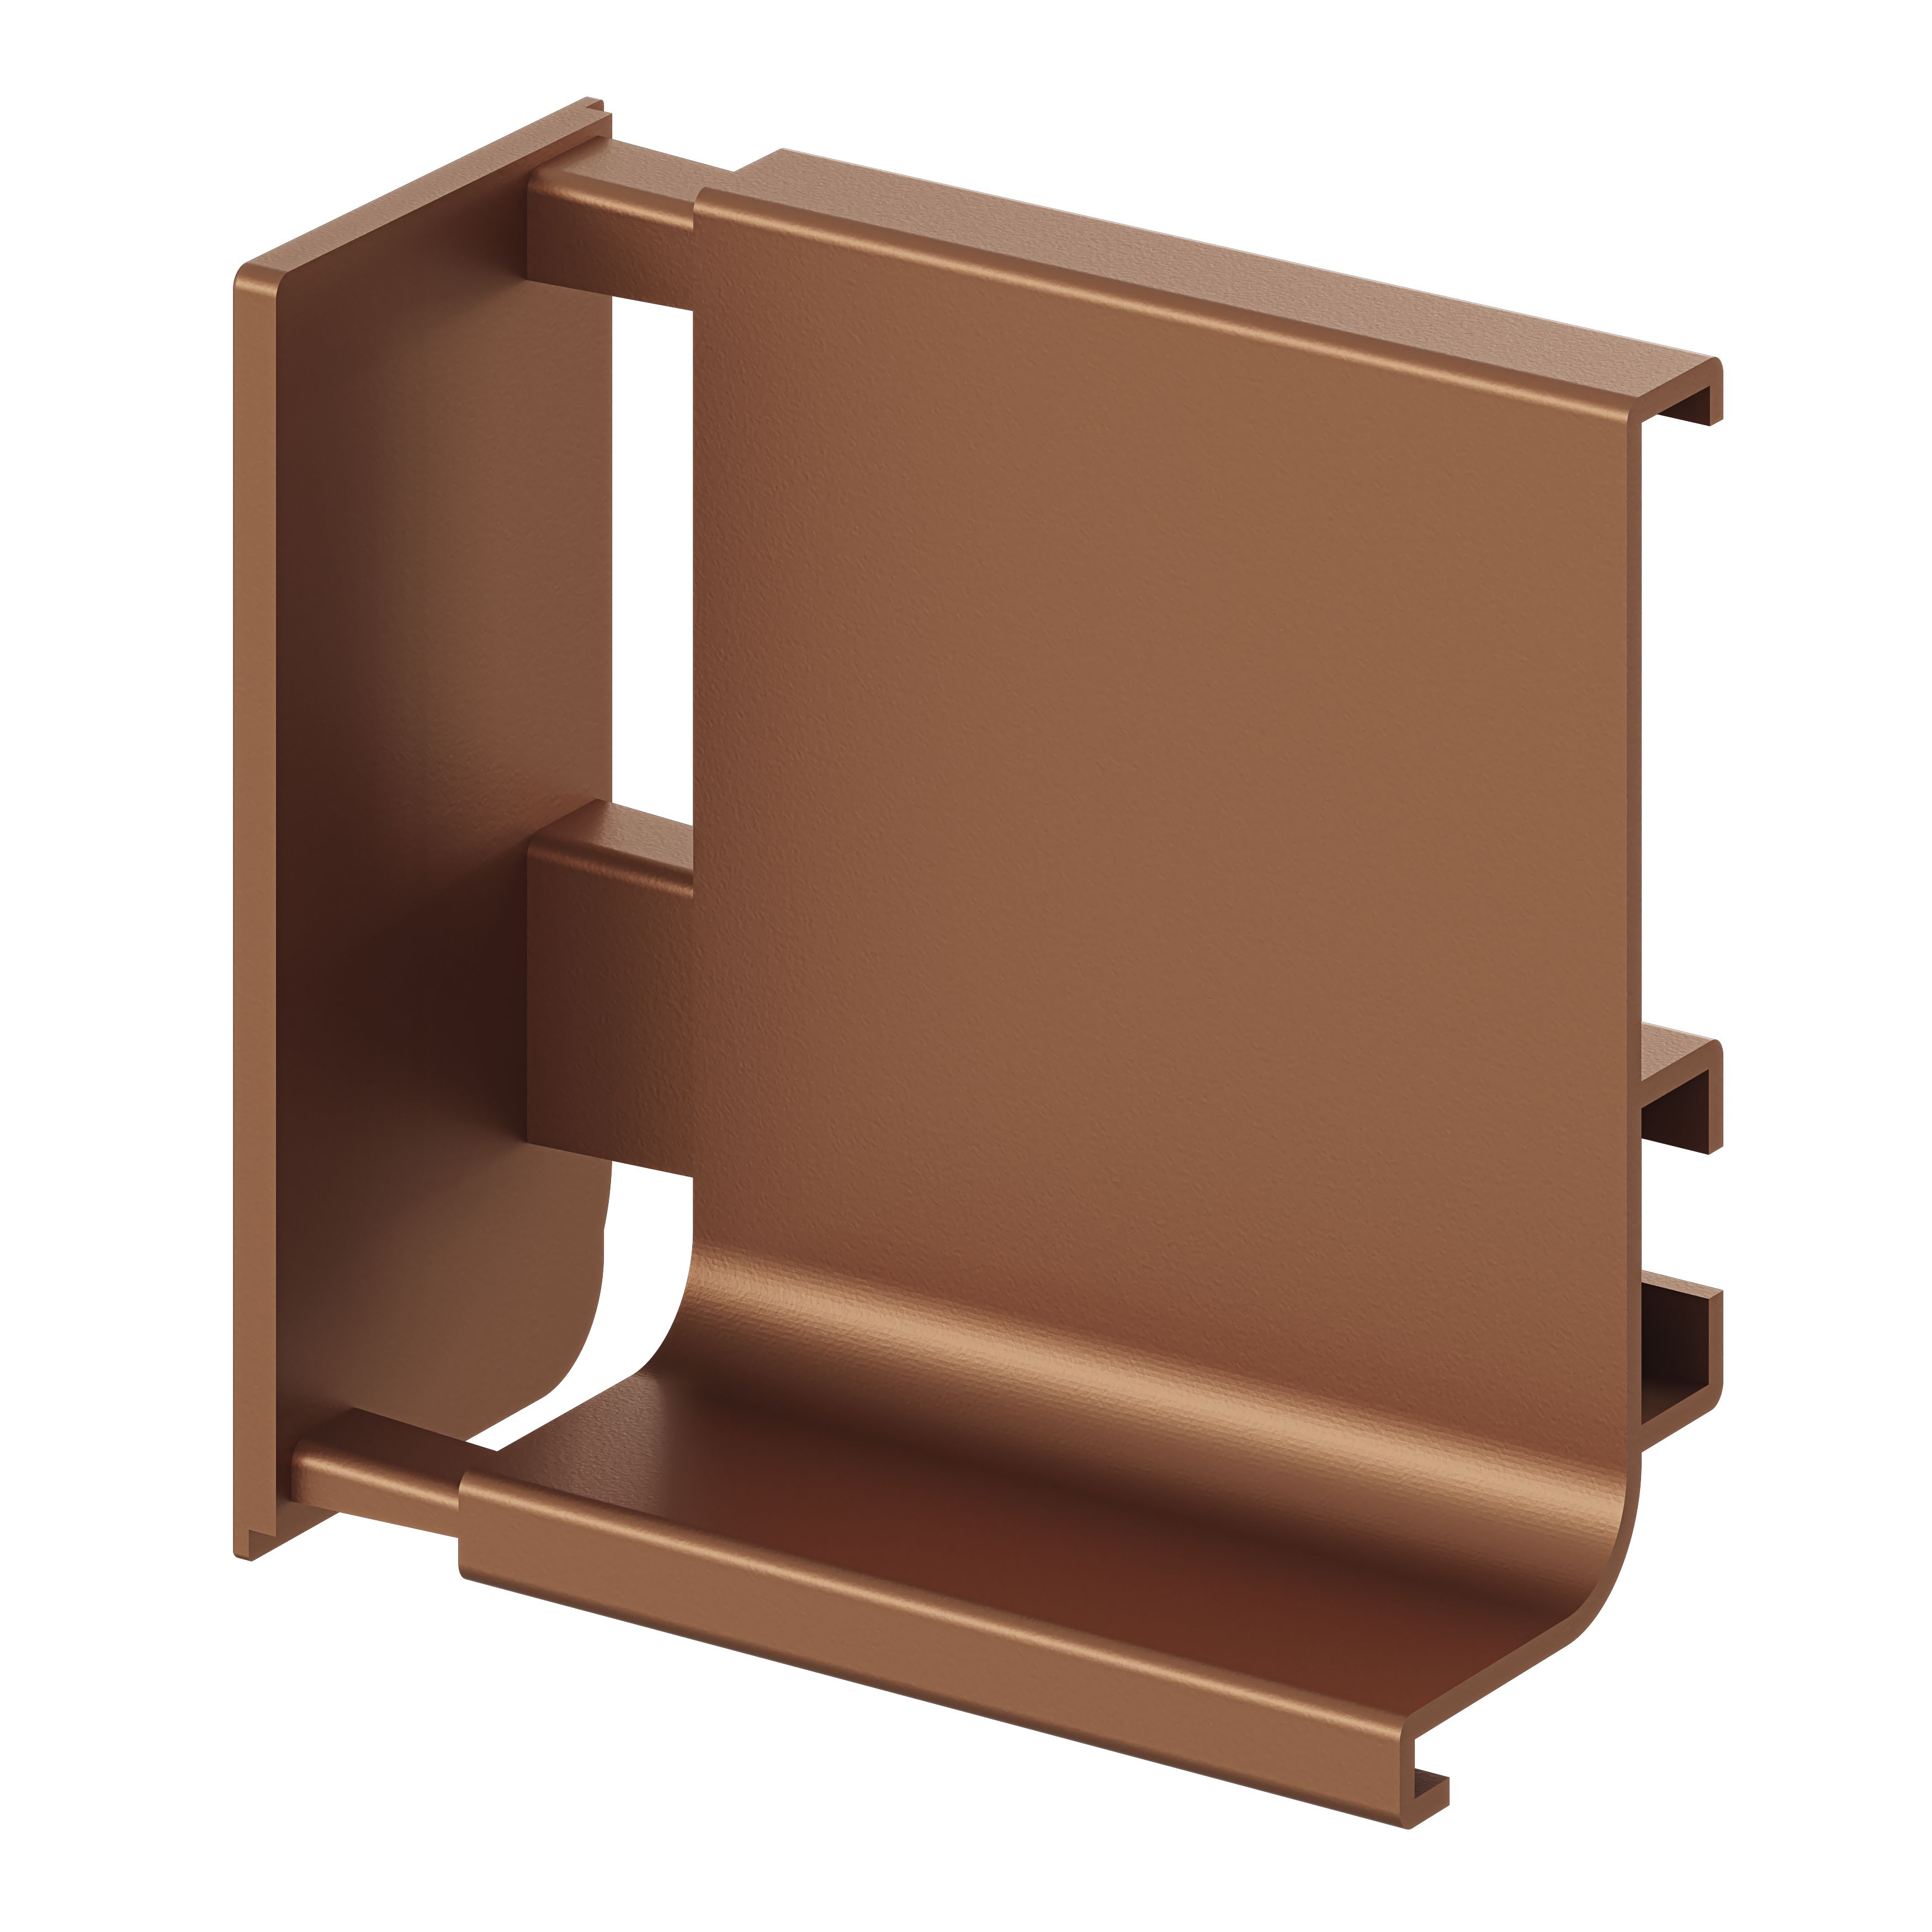 GoodHome Caraway Innovo Brushed Copper Effect Worktop rail end cap, Pair of 2